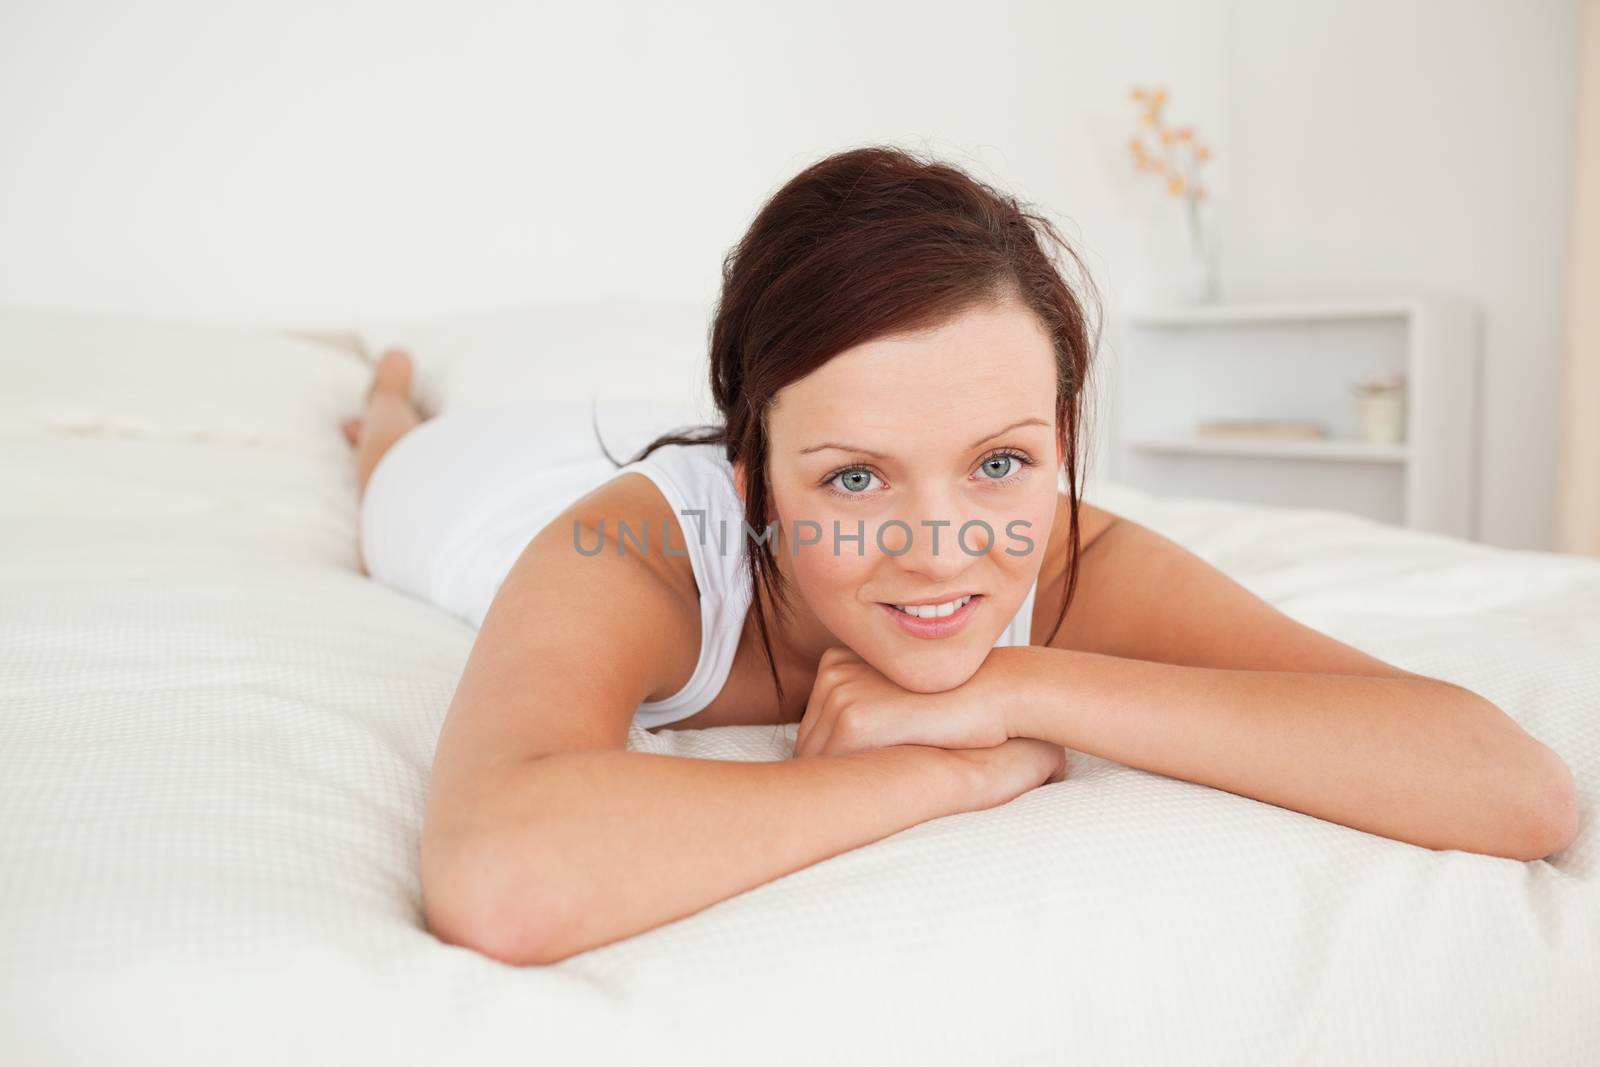 Smiling woman looking at the camera in her bedroom